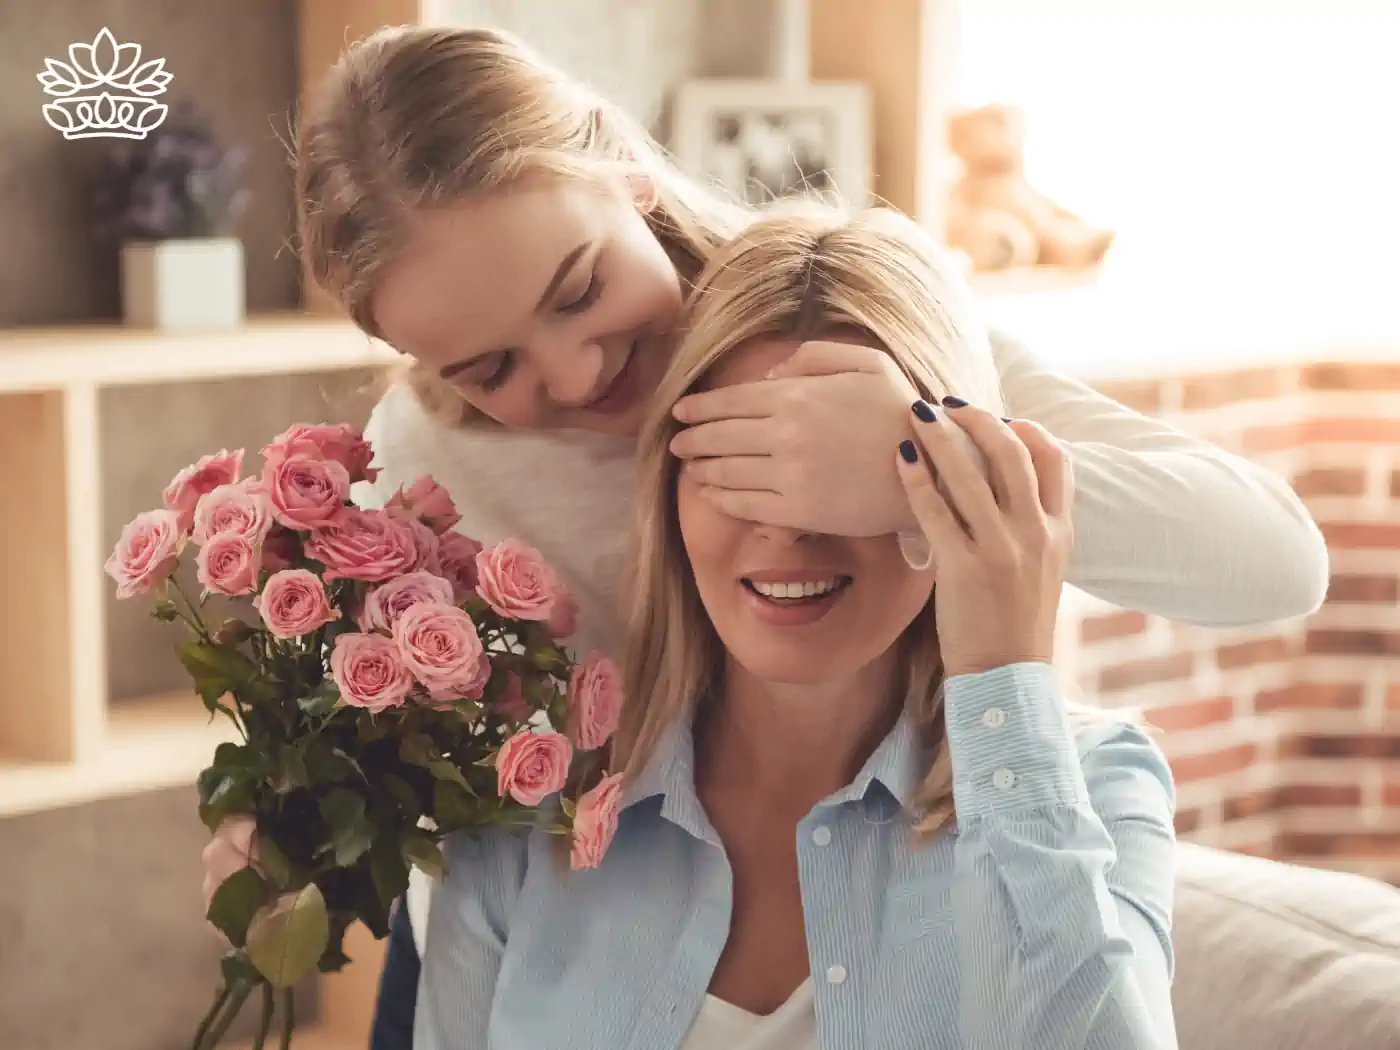 A young woman surprises another by covering her eyes from behind, holding a bouquet of pink roses, in a cozy, sunlit room. 